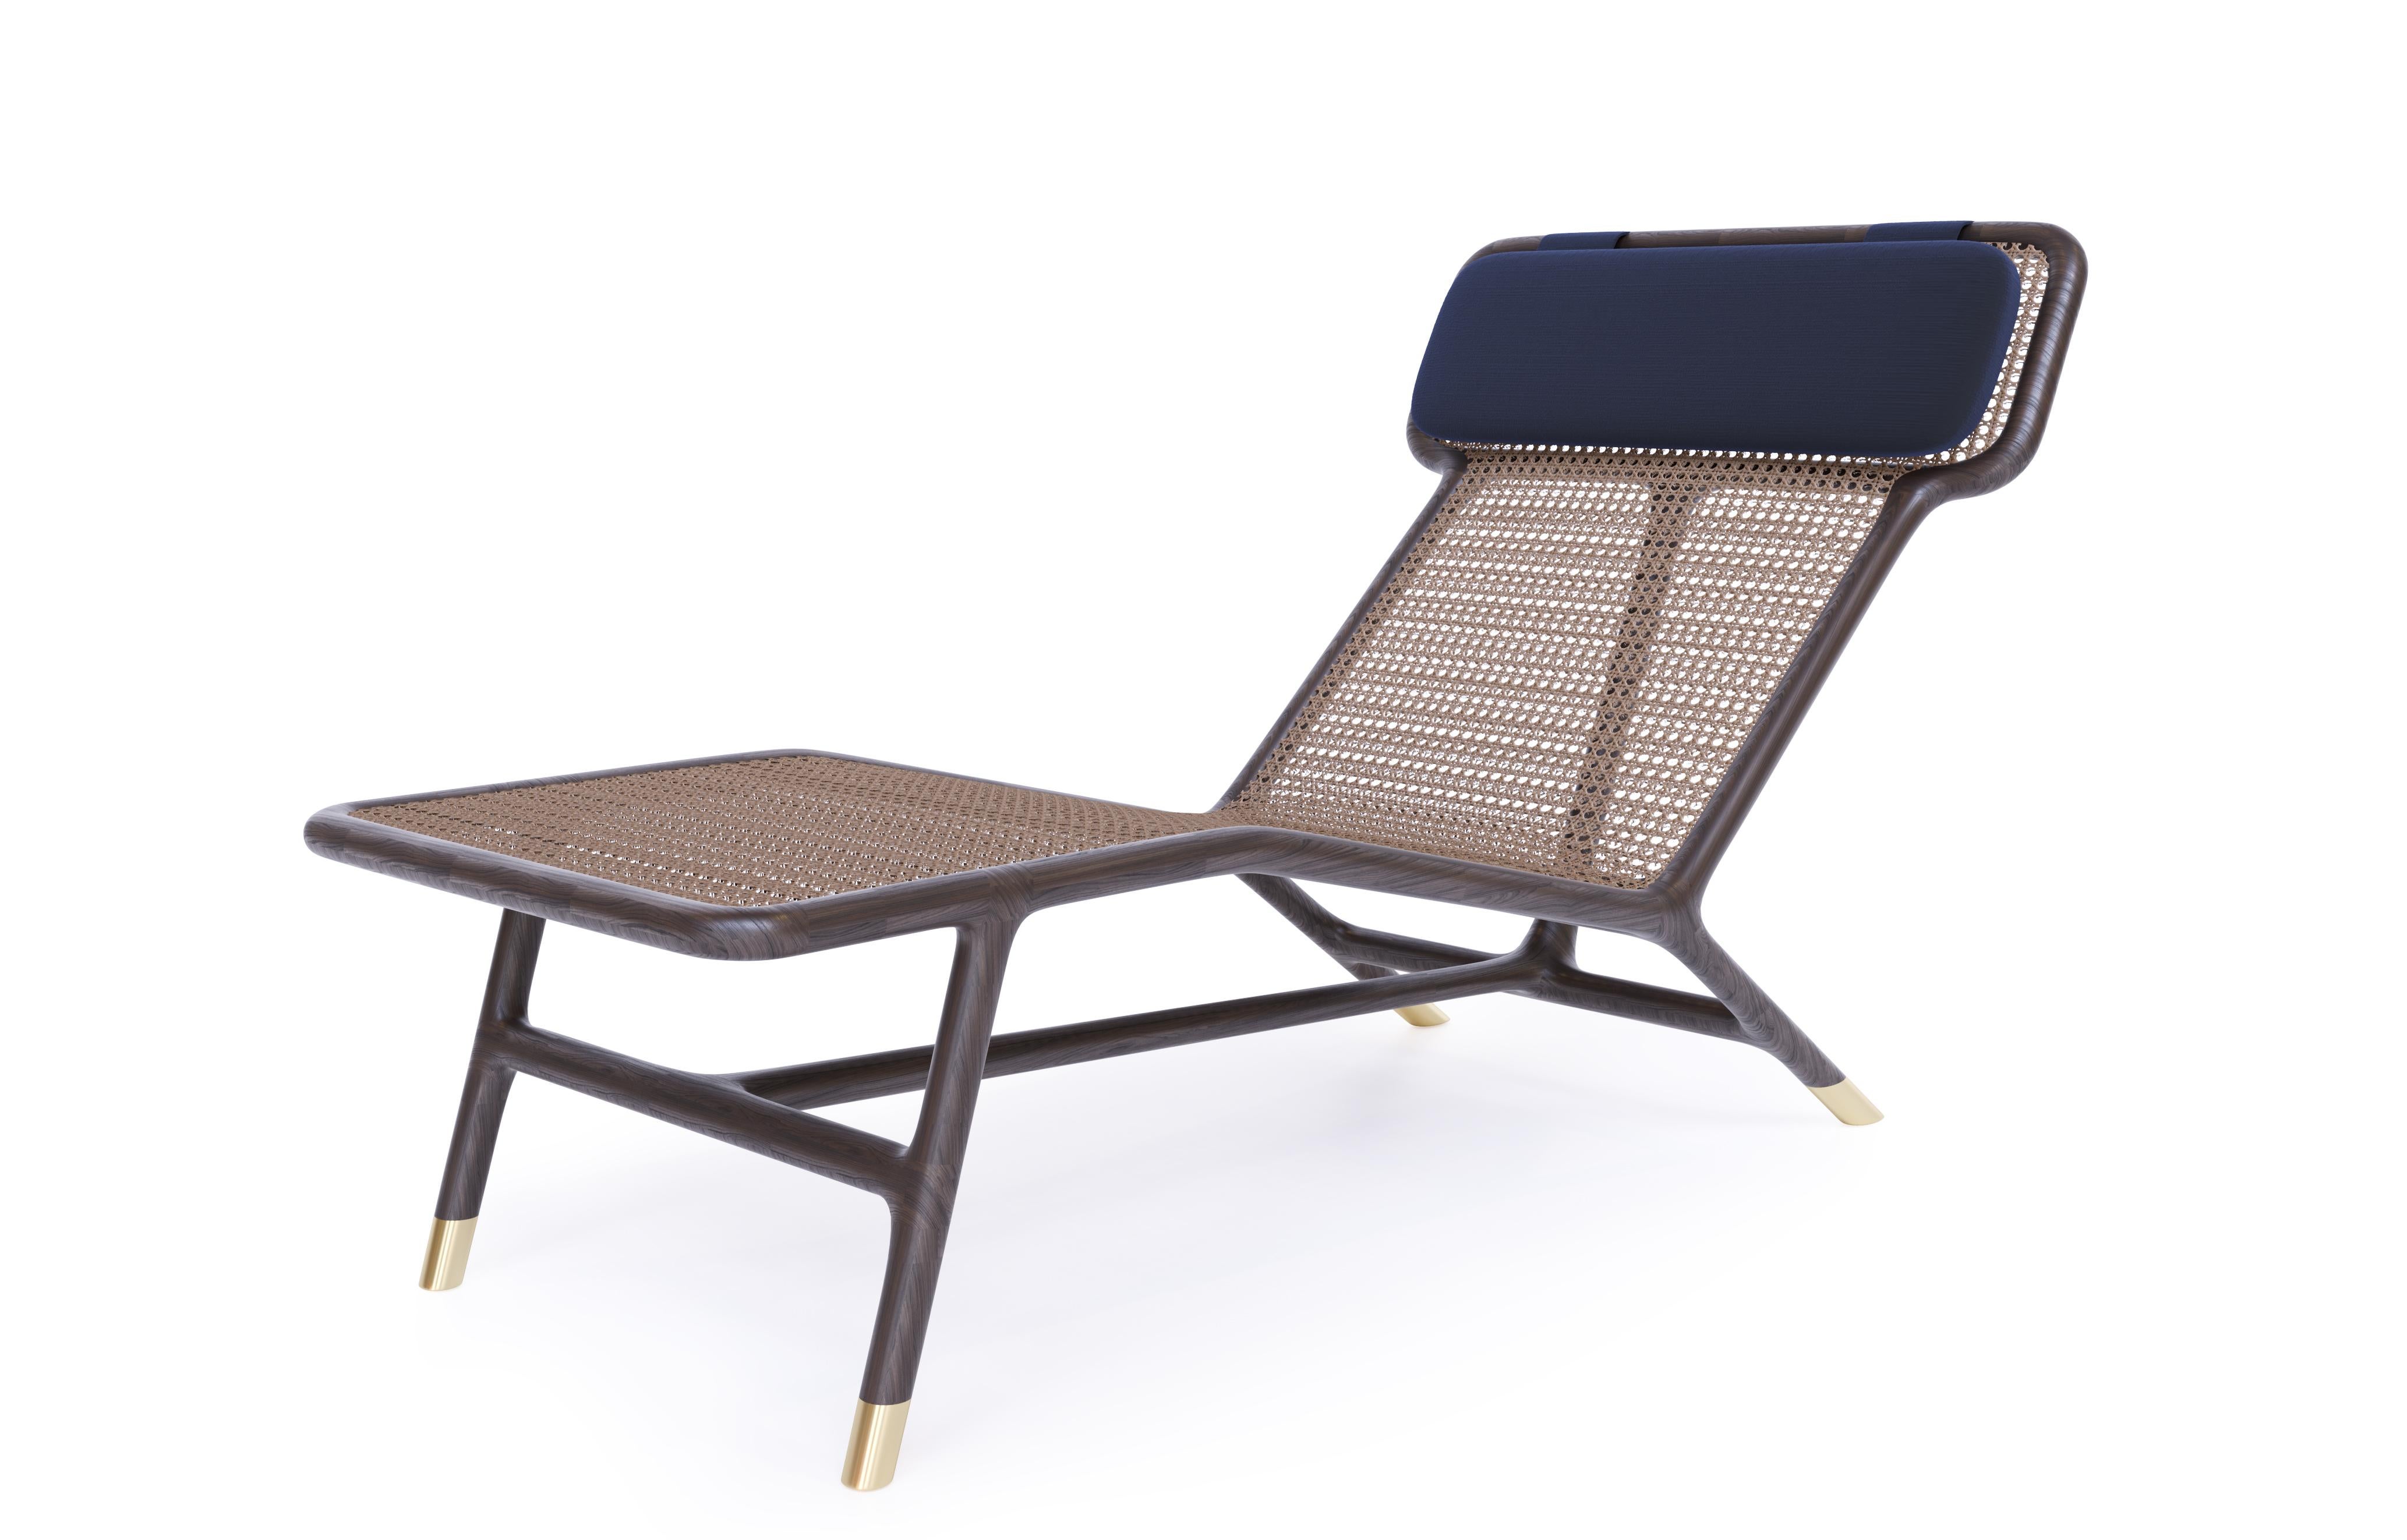 Contemporary style Joyce lounge chair made of ashwood and Vienna straw
Designed by Libero Rutilo
Dimensions L84 W166 H94 cm
Made in Italy by Morelato

Joyce is a stylish lounge chair made with ash tree and Vienna straw, reinterpreting classical